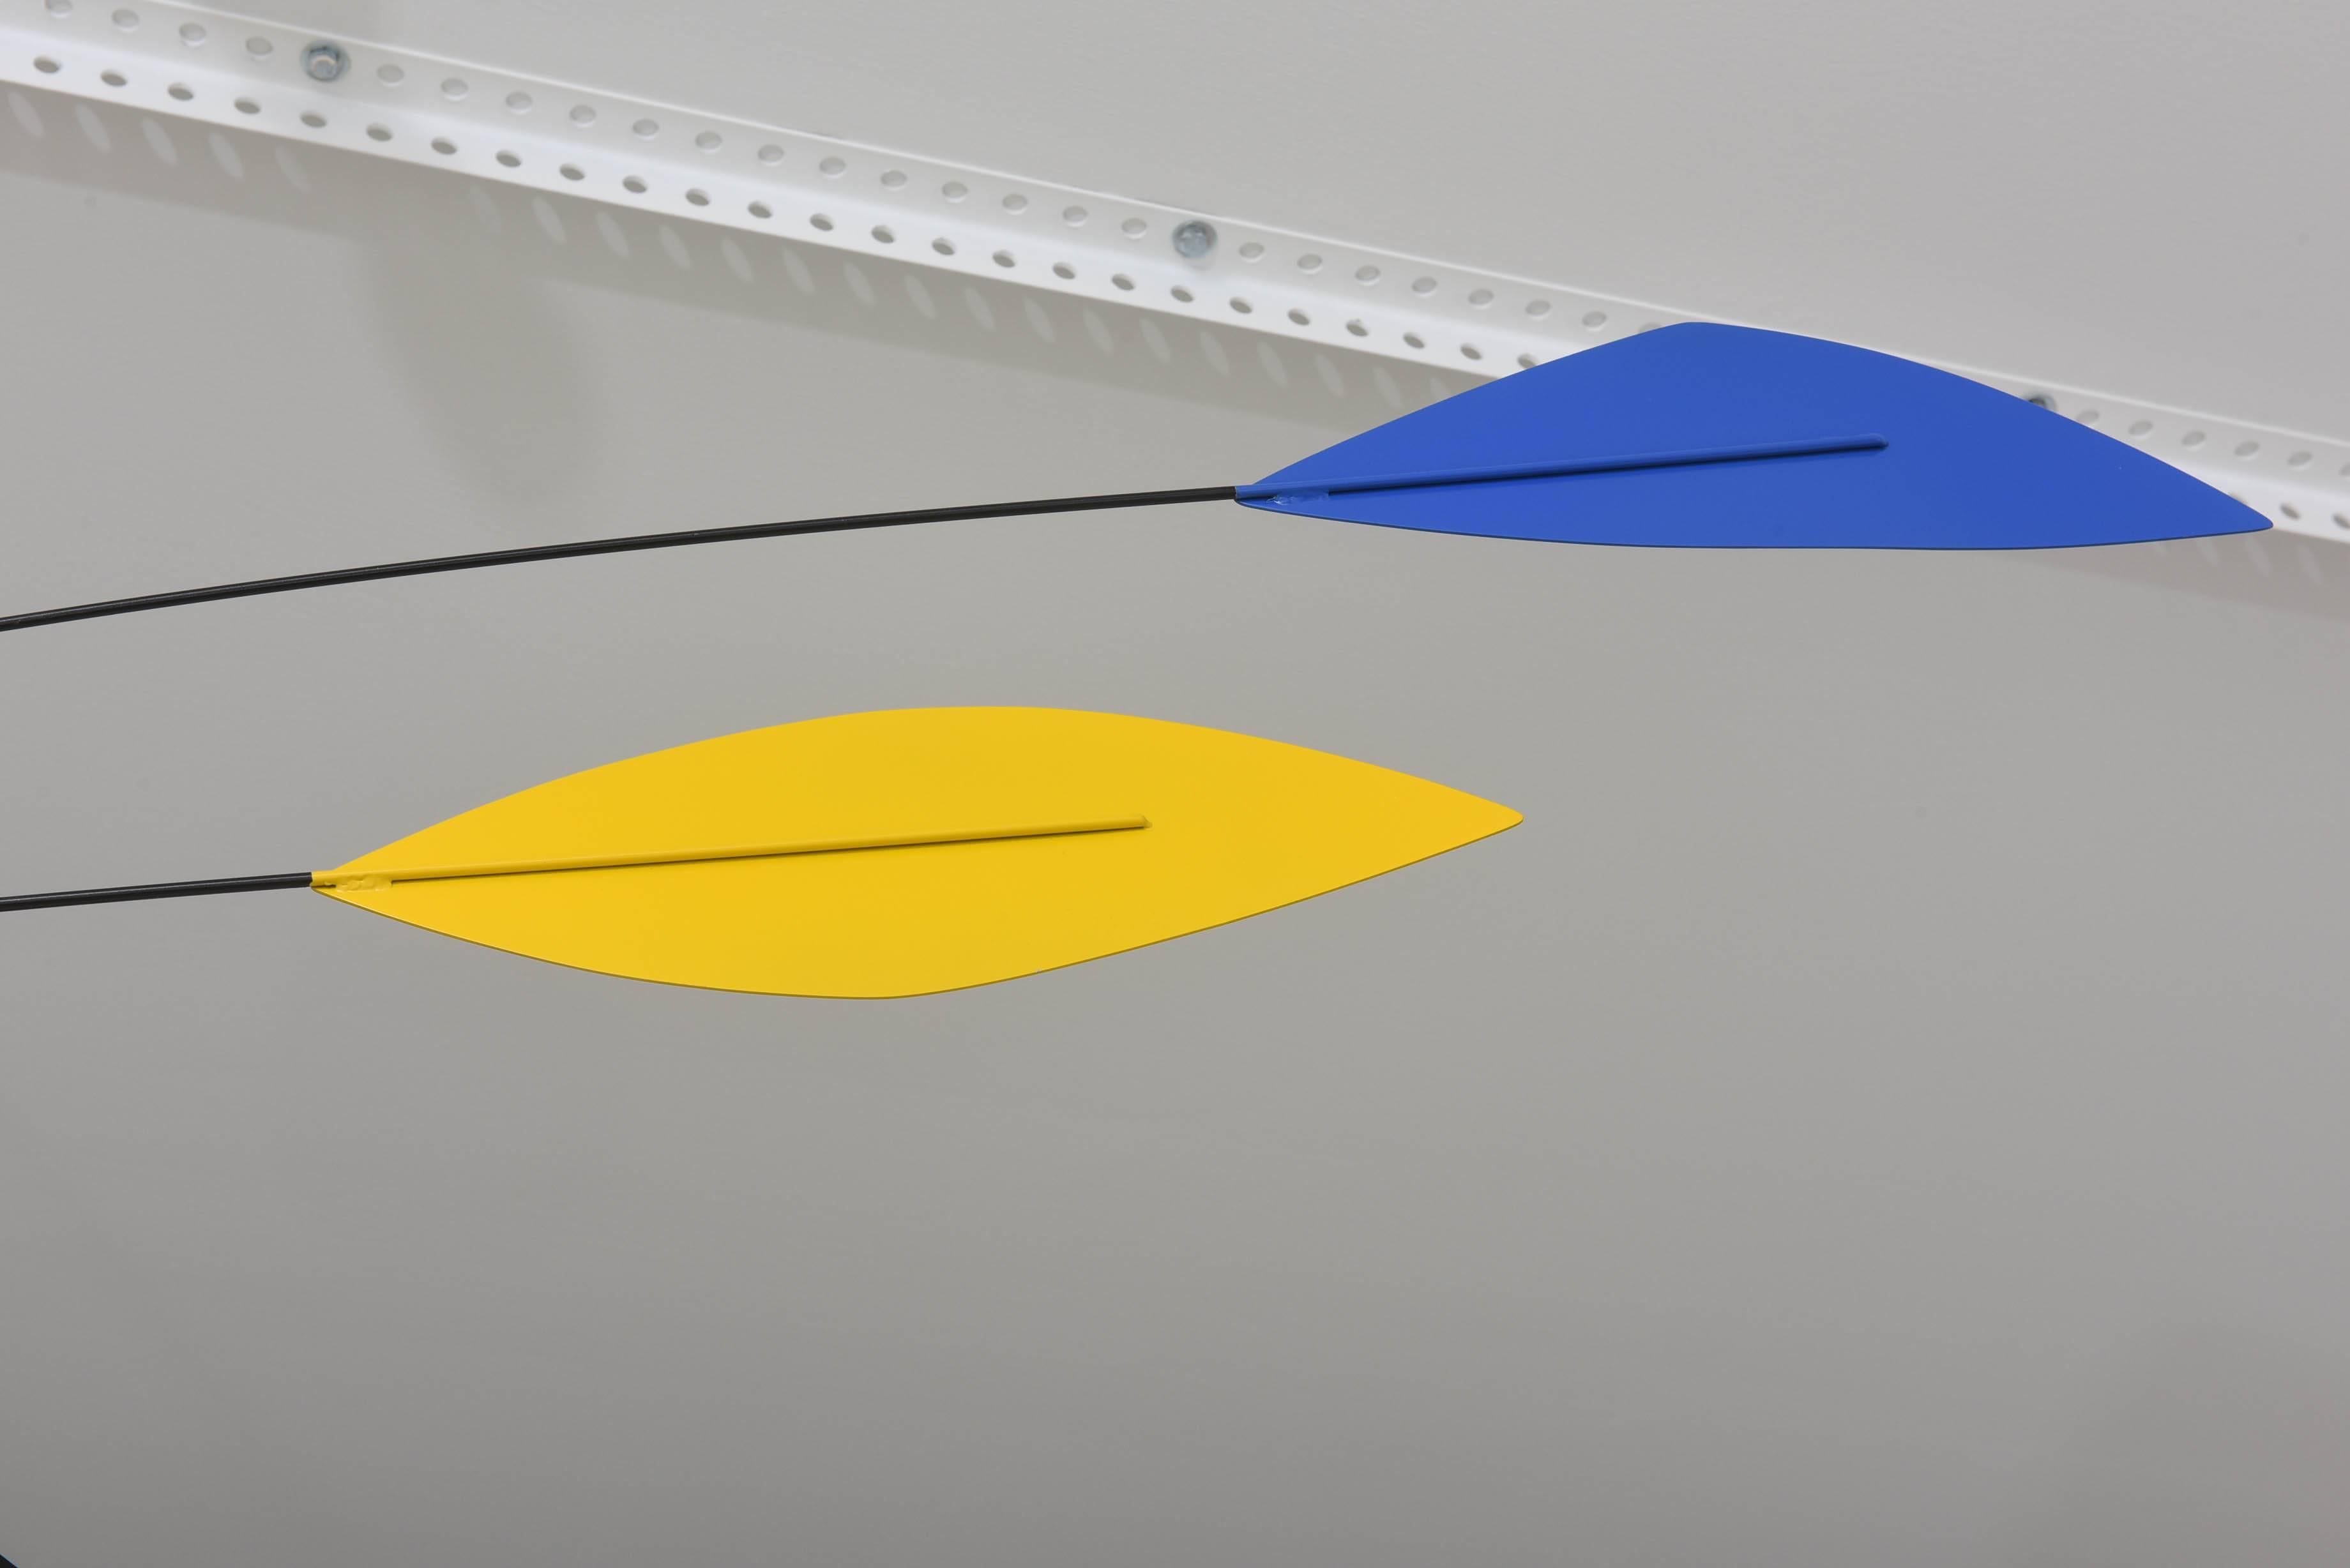 Metal Multi-Colored Mobile in the Manner of Alexander Calder, American, 20th Century